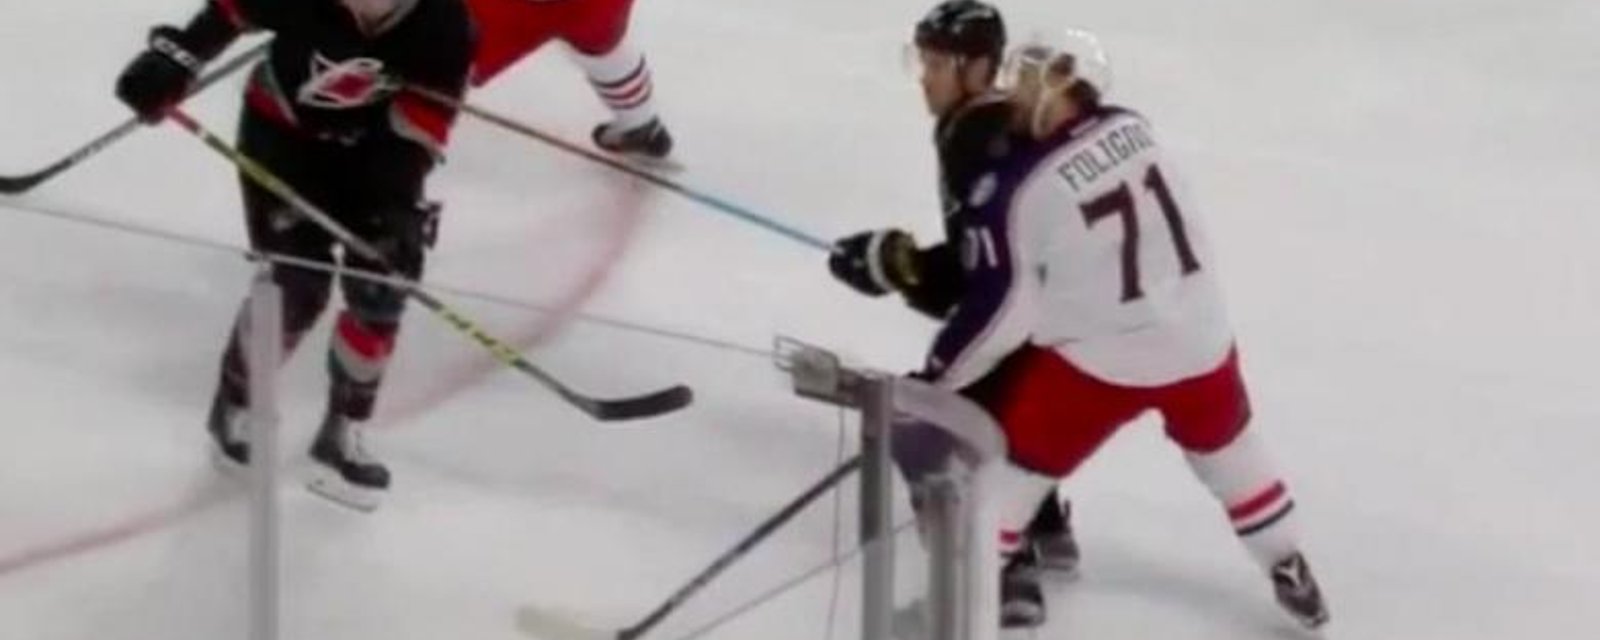 Malone will not be suspended after dangerous hit on Foligno.